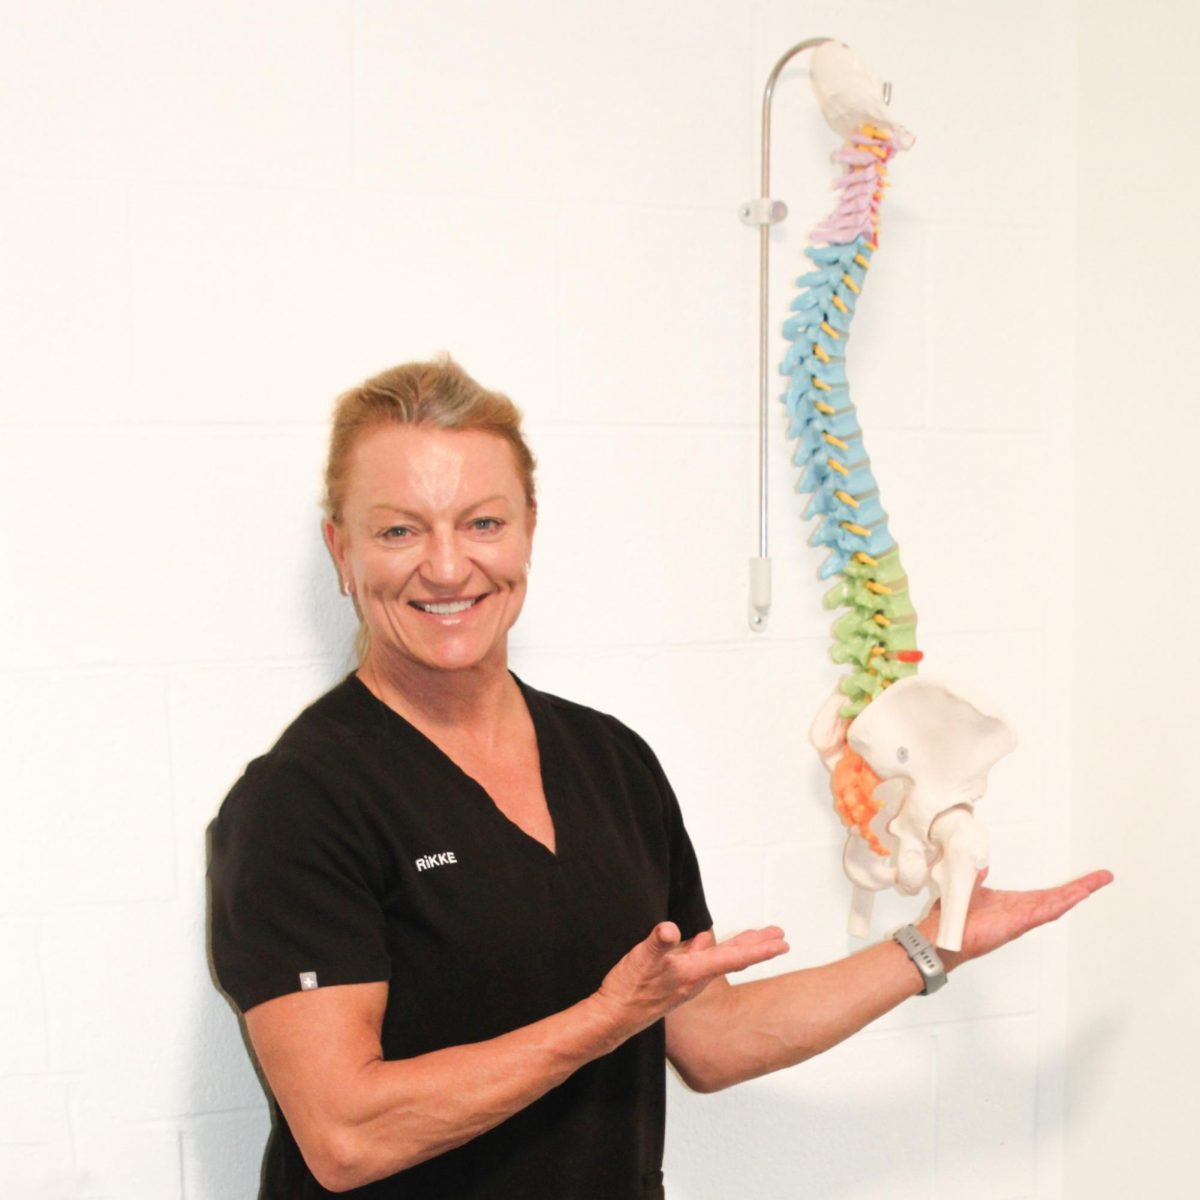 Chiropractor Rikke Johansen gestures towards a model of a healthy spine. Spine problems are becoming even more prevalent in teenagers because of increased screen time. “Ive been in practice for 35 years and I’ve seen what posture has done to people long before we had technology and hand-held devices.”
